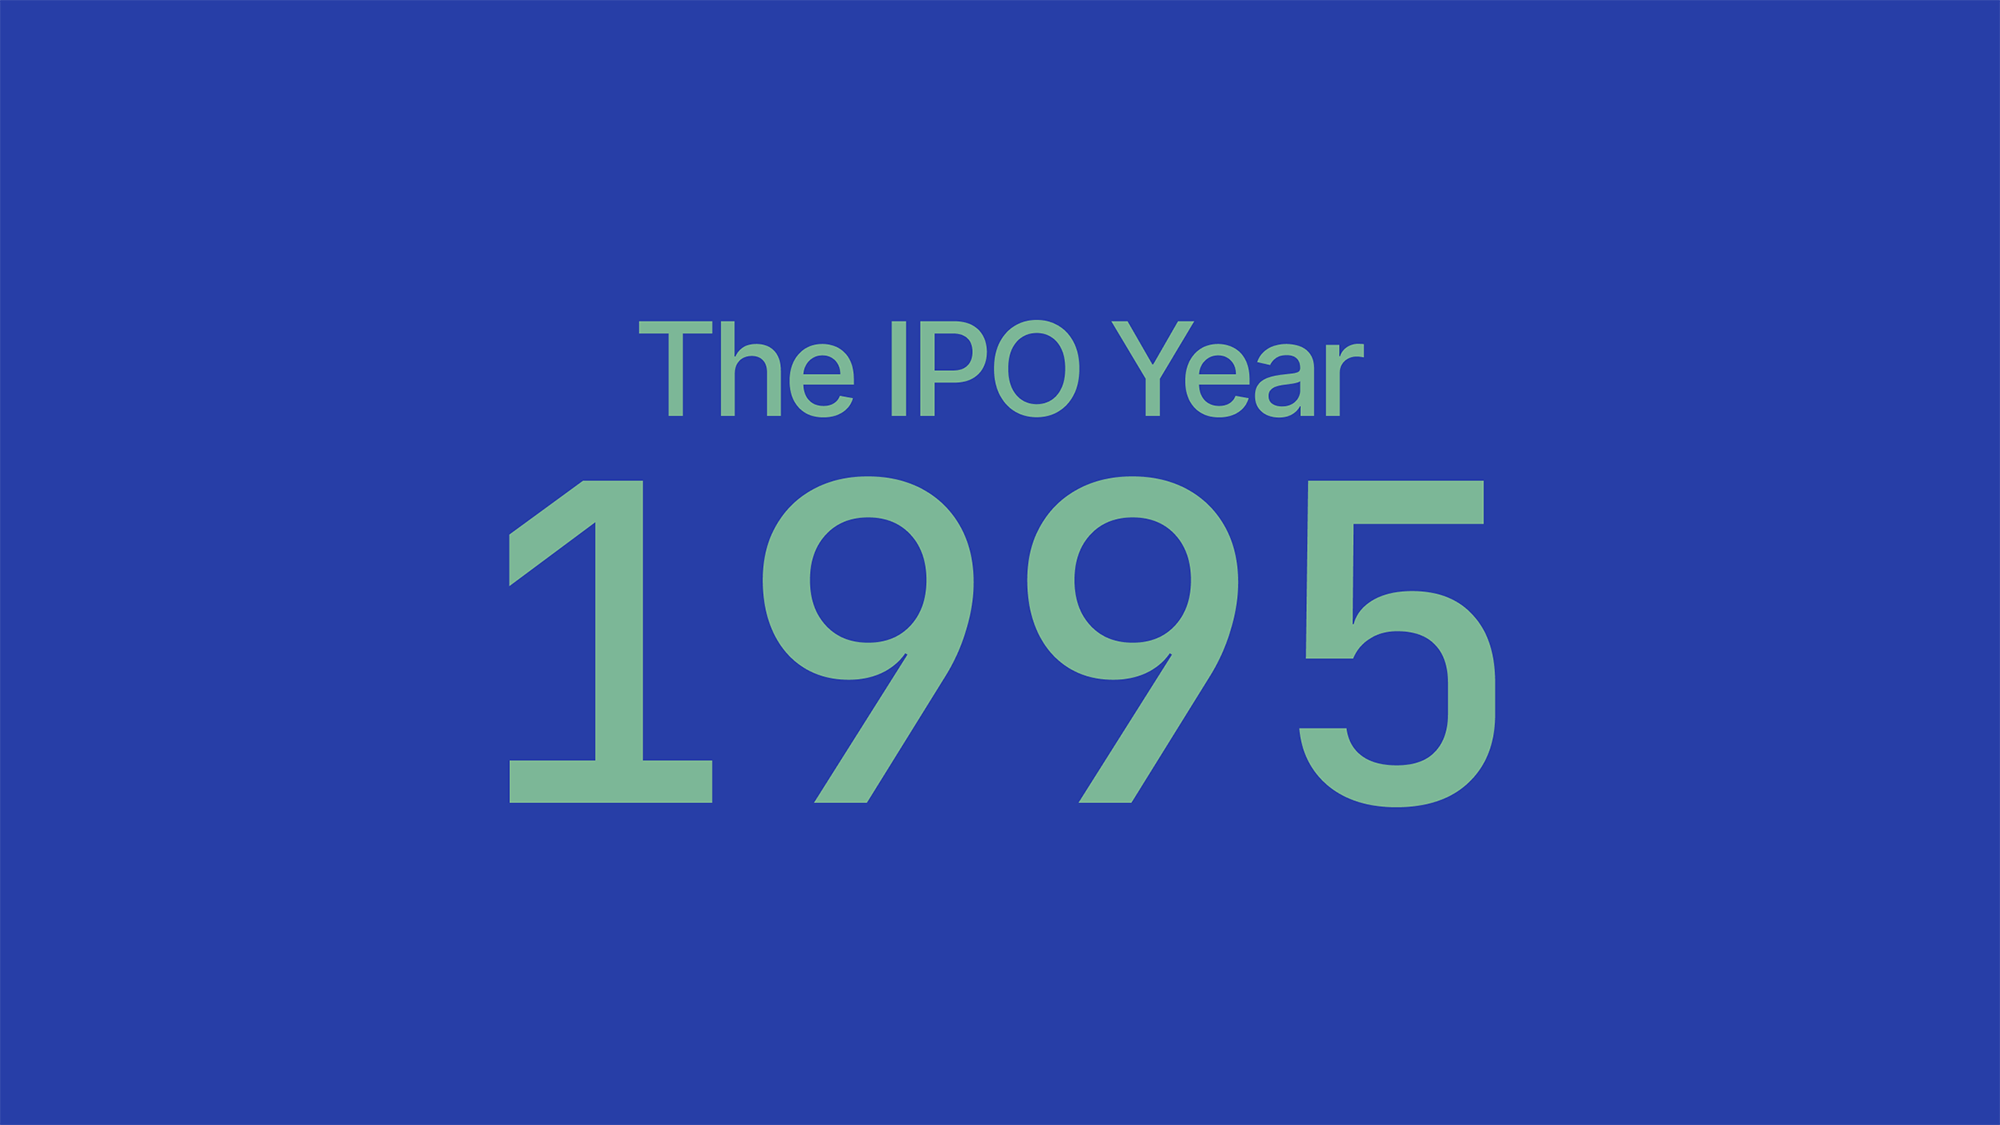 The IPO Year 1995